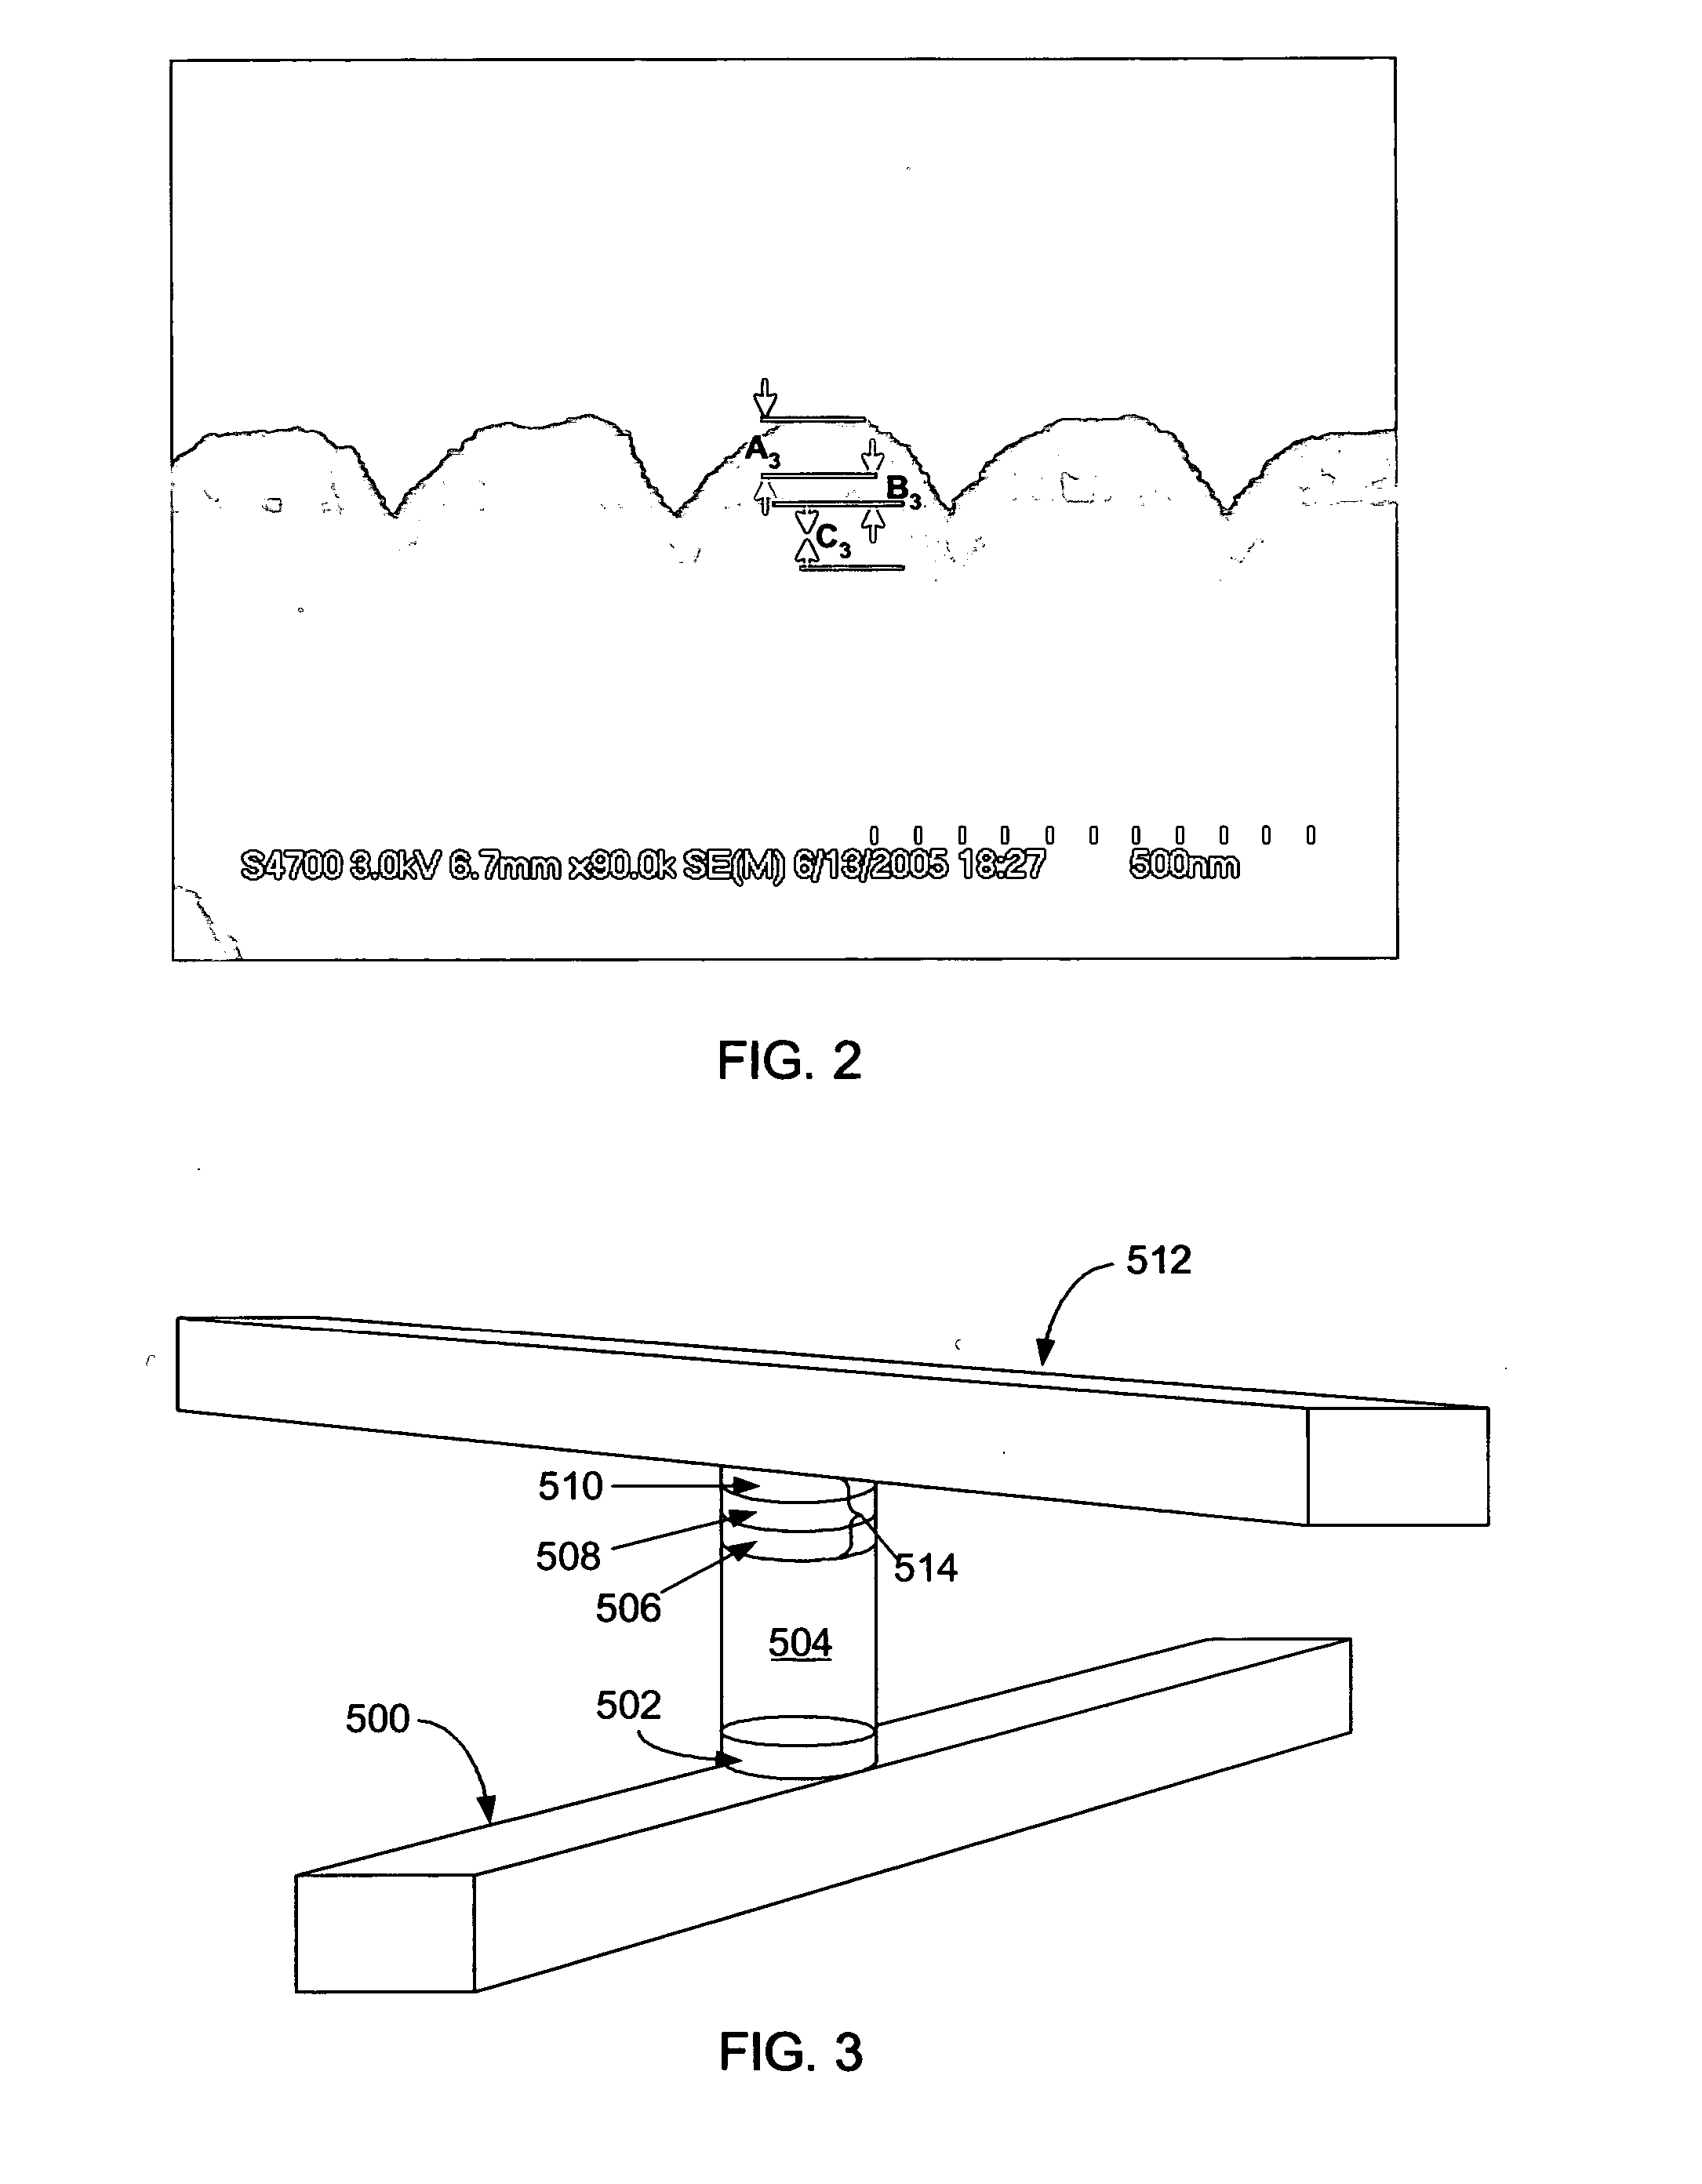 Method of plasma etching transition metals and their compounds